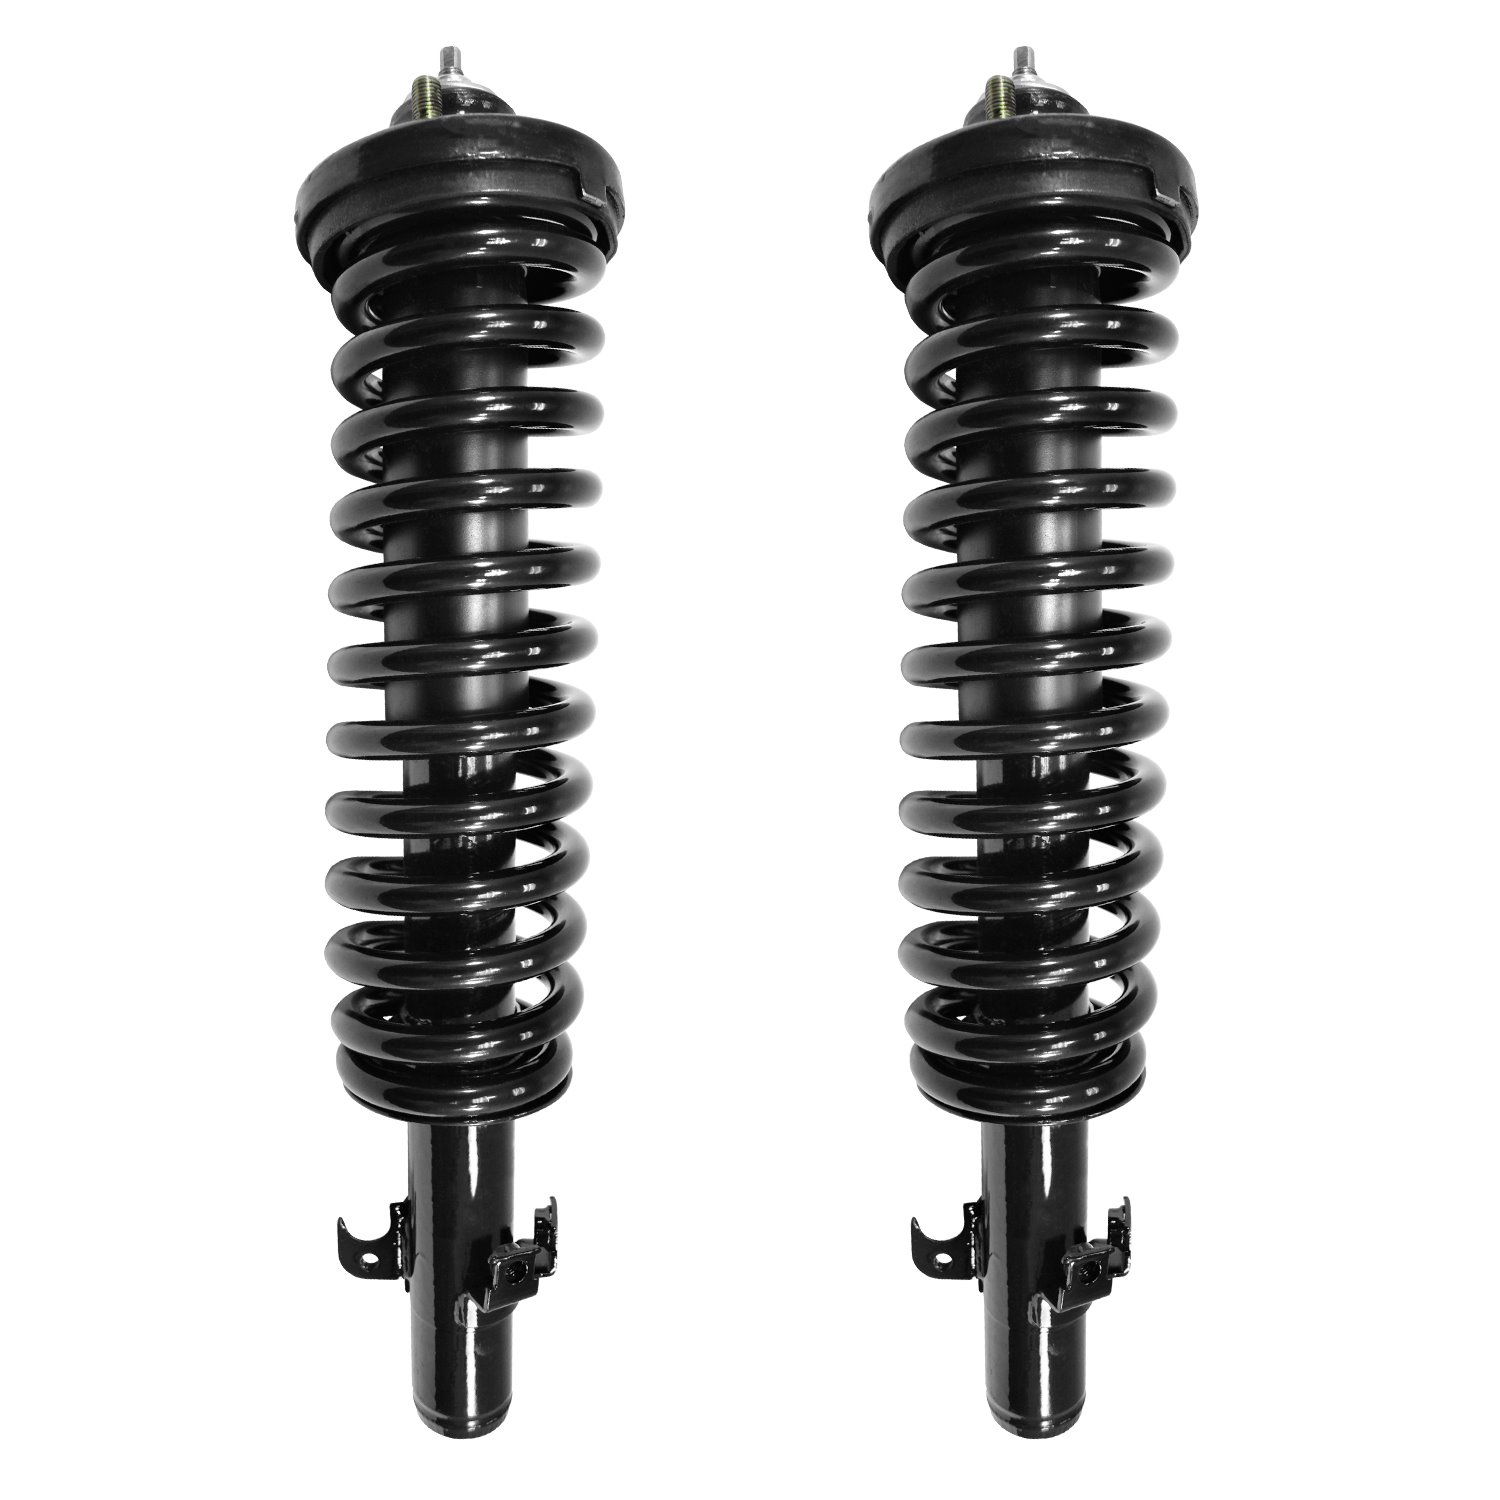 2-11144-001 Suspension Strut & Coil Spring Assembly Set Fits Select Acura CL